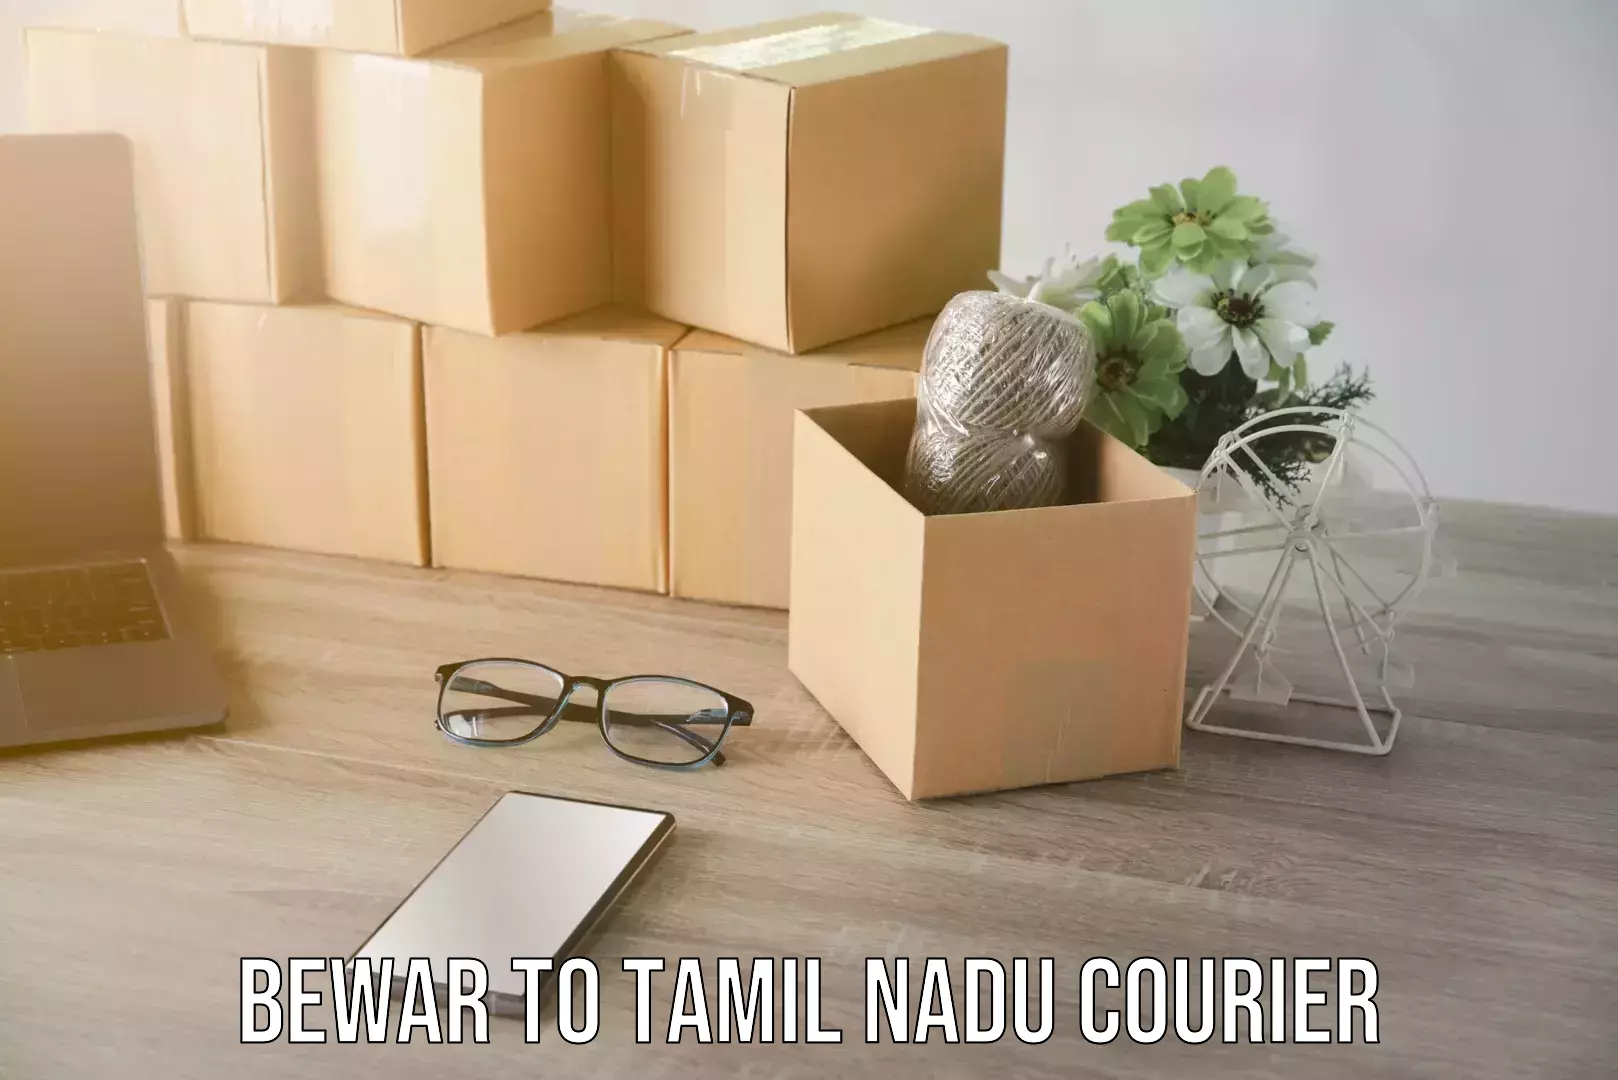 Same-day delivery solutions Bewar to Tamil Nadu